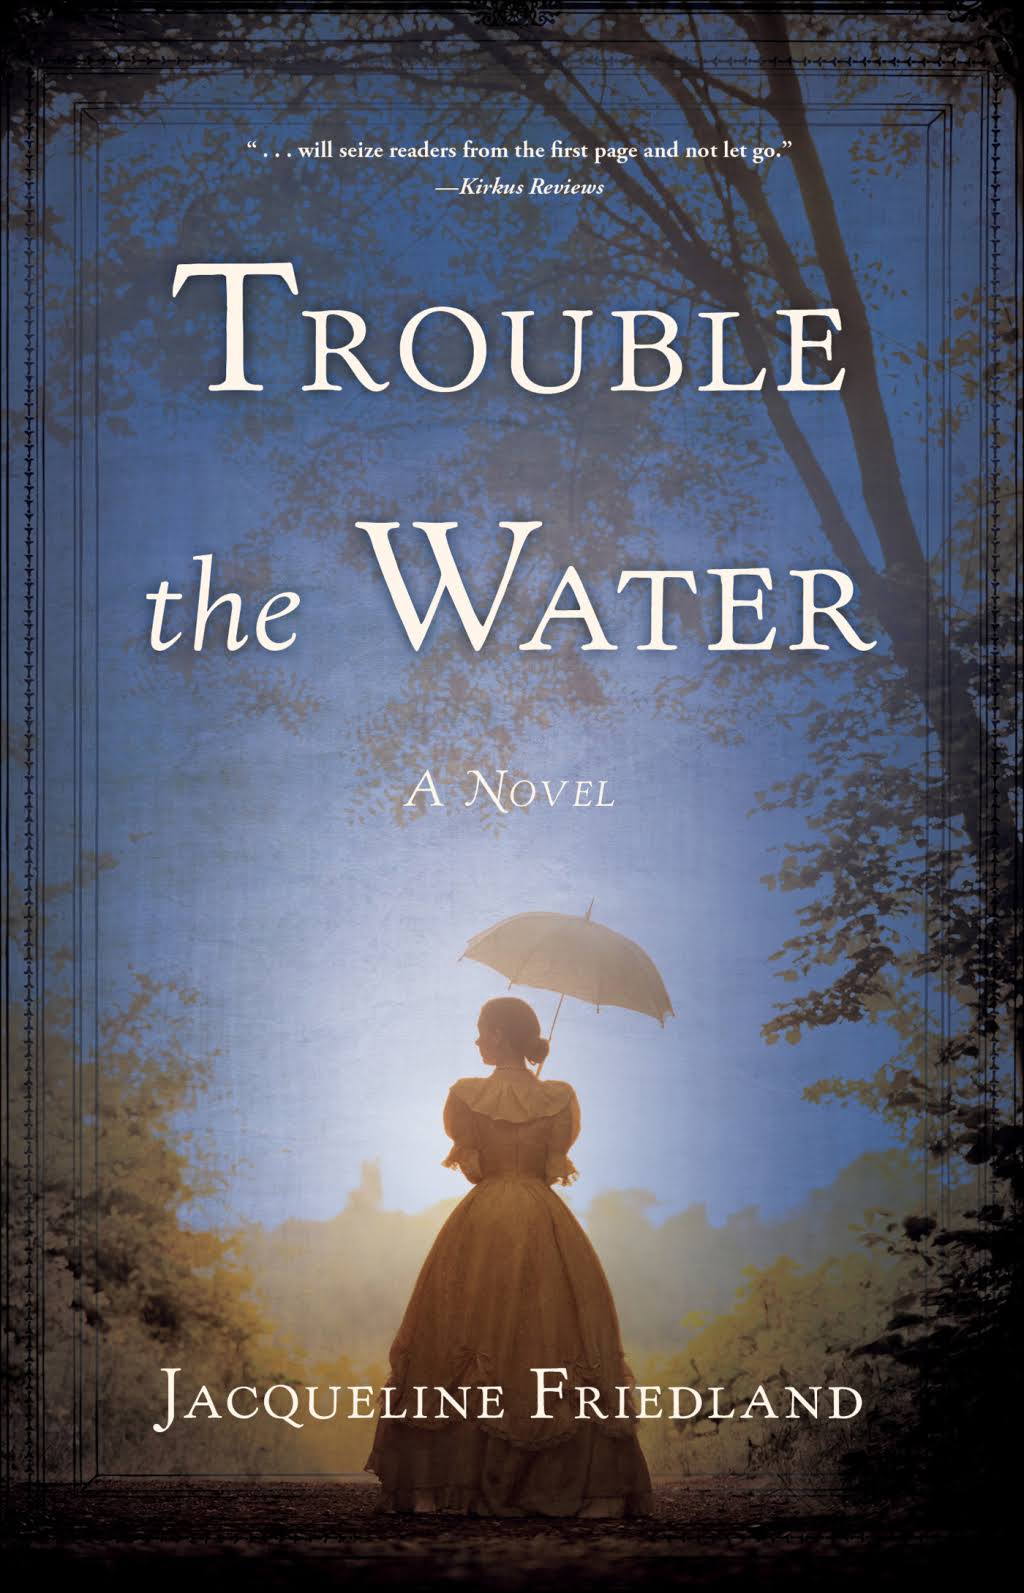 Trouble the Water - Jacqueline Friedland